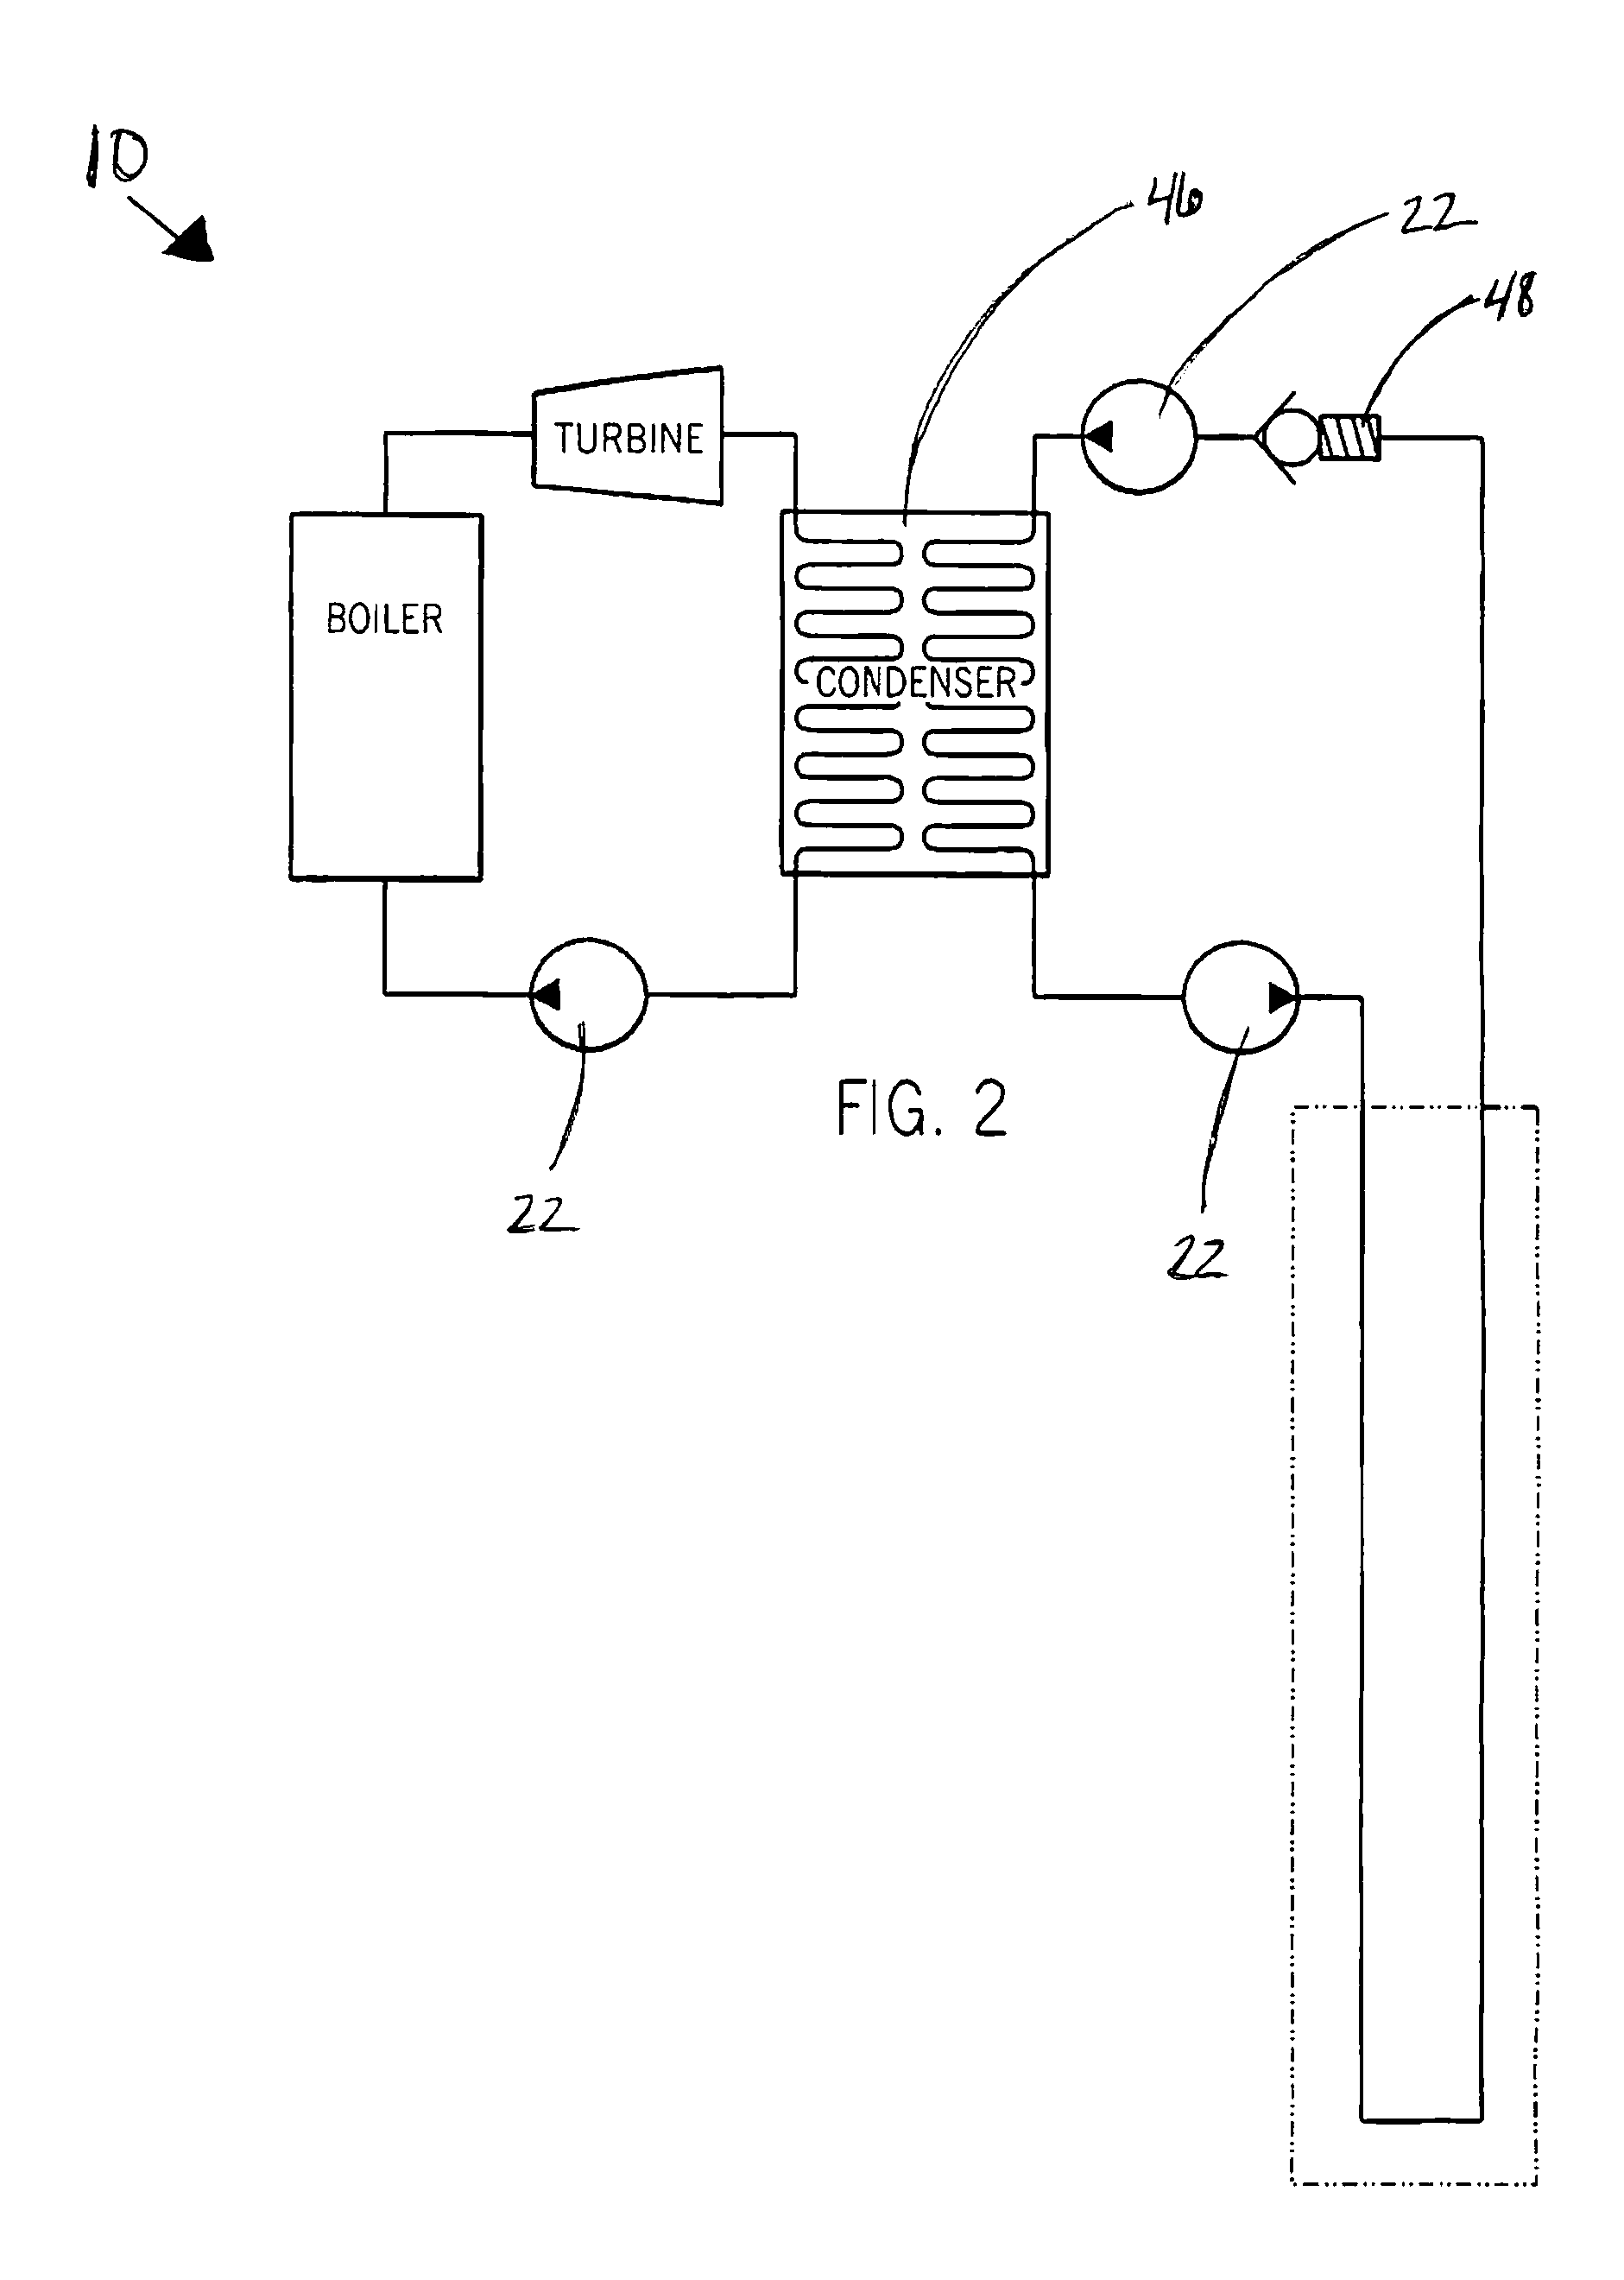 Geothermal Cooling System for an Energy-Producing Plant